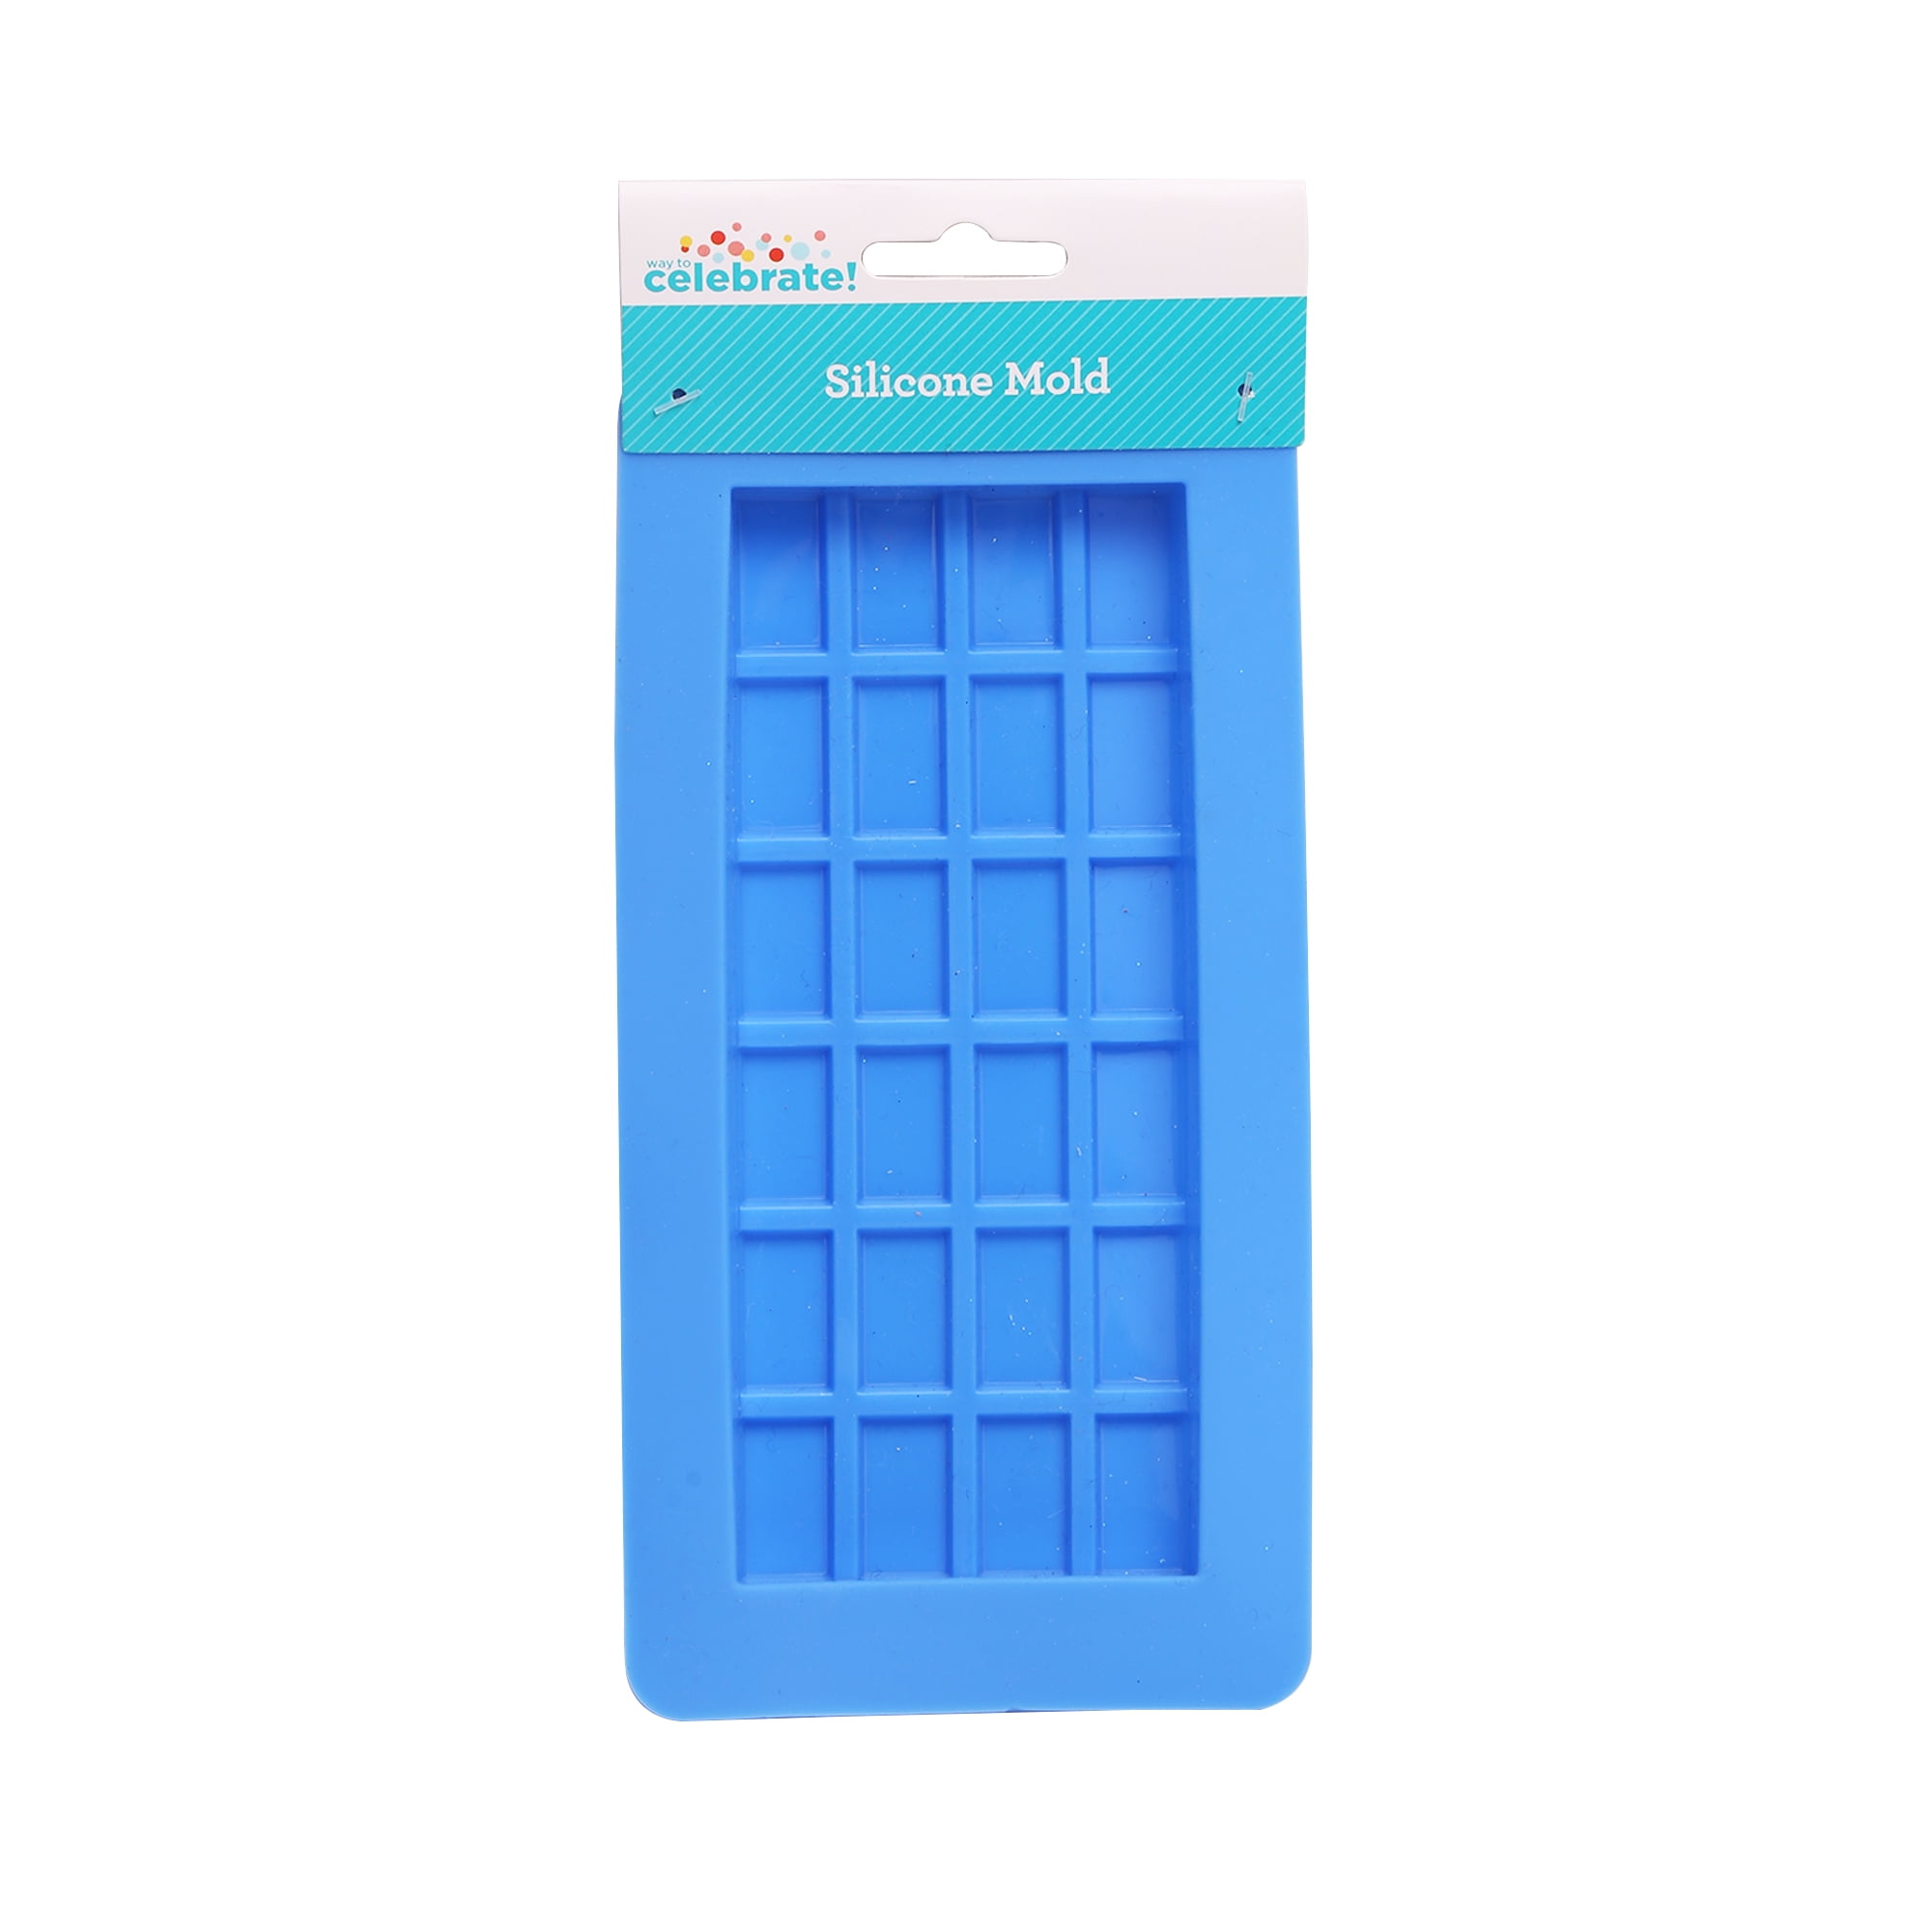 AUPERTO DIY Silicone Candy Molds - Easy To Use and Clean Chocolate